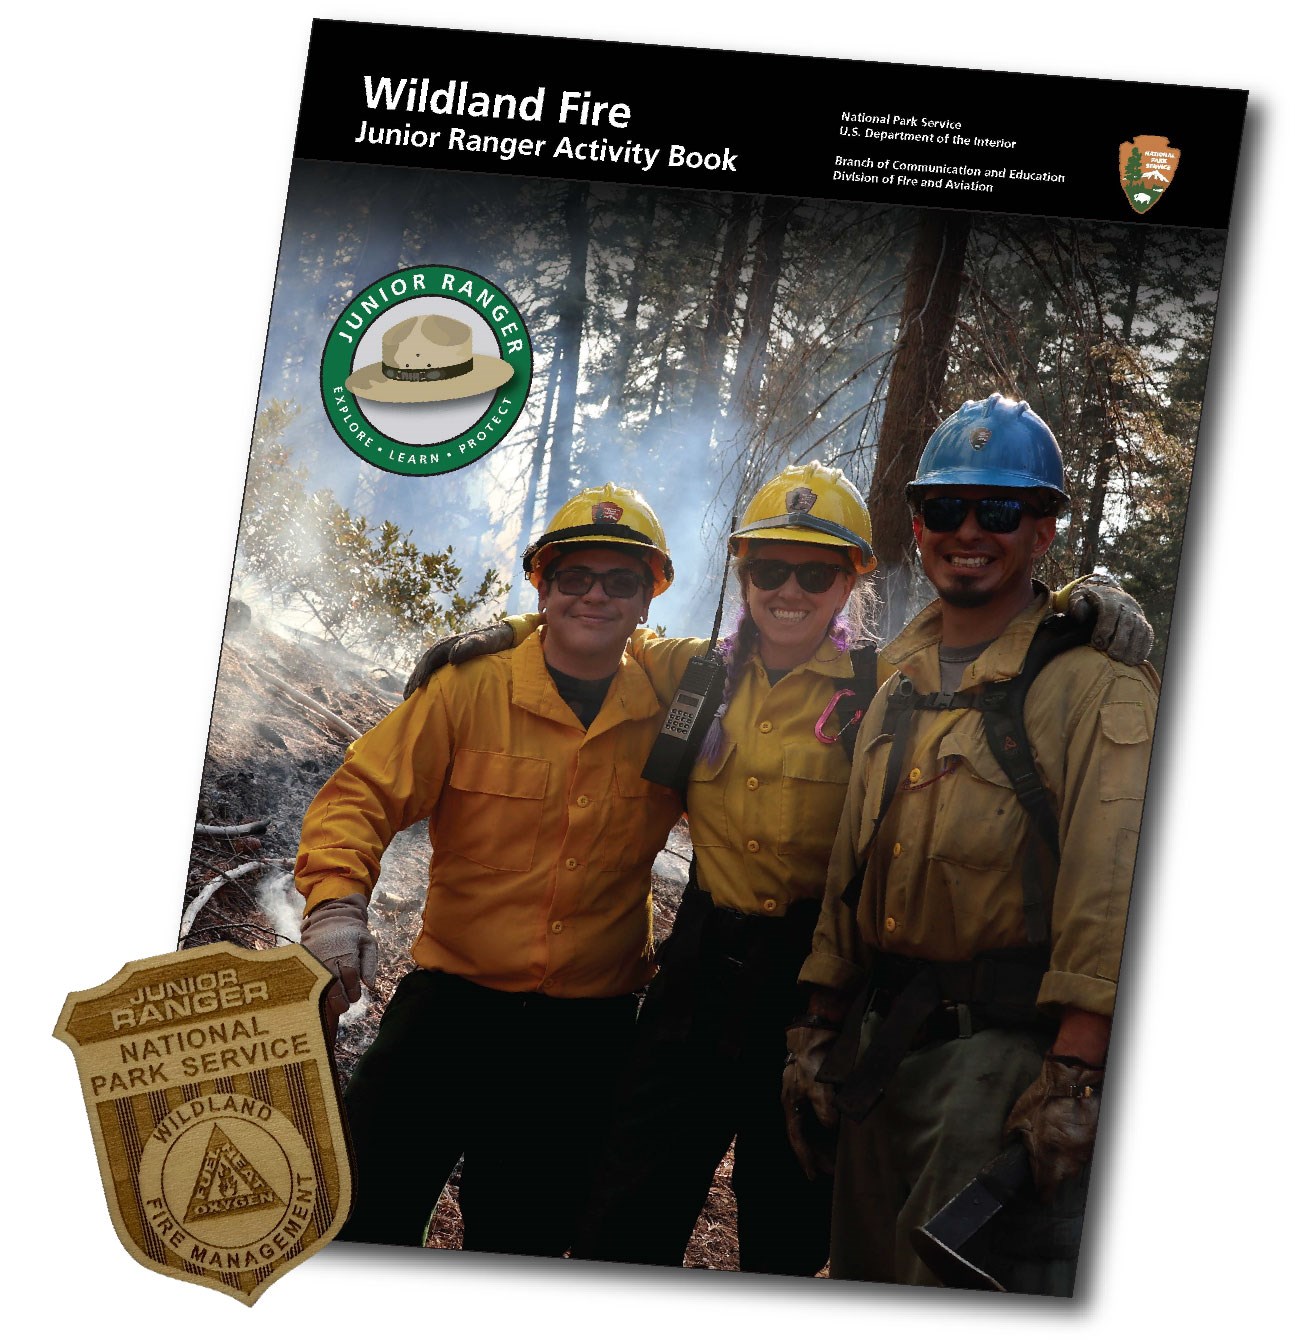 Cover of wildland fire junior ranger booklet with badge inset.